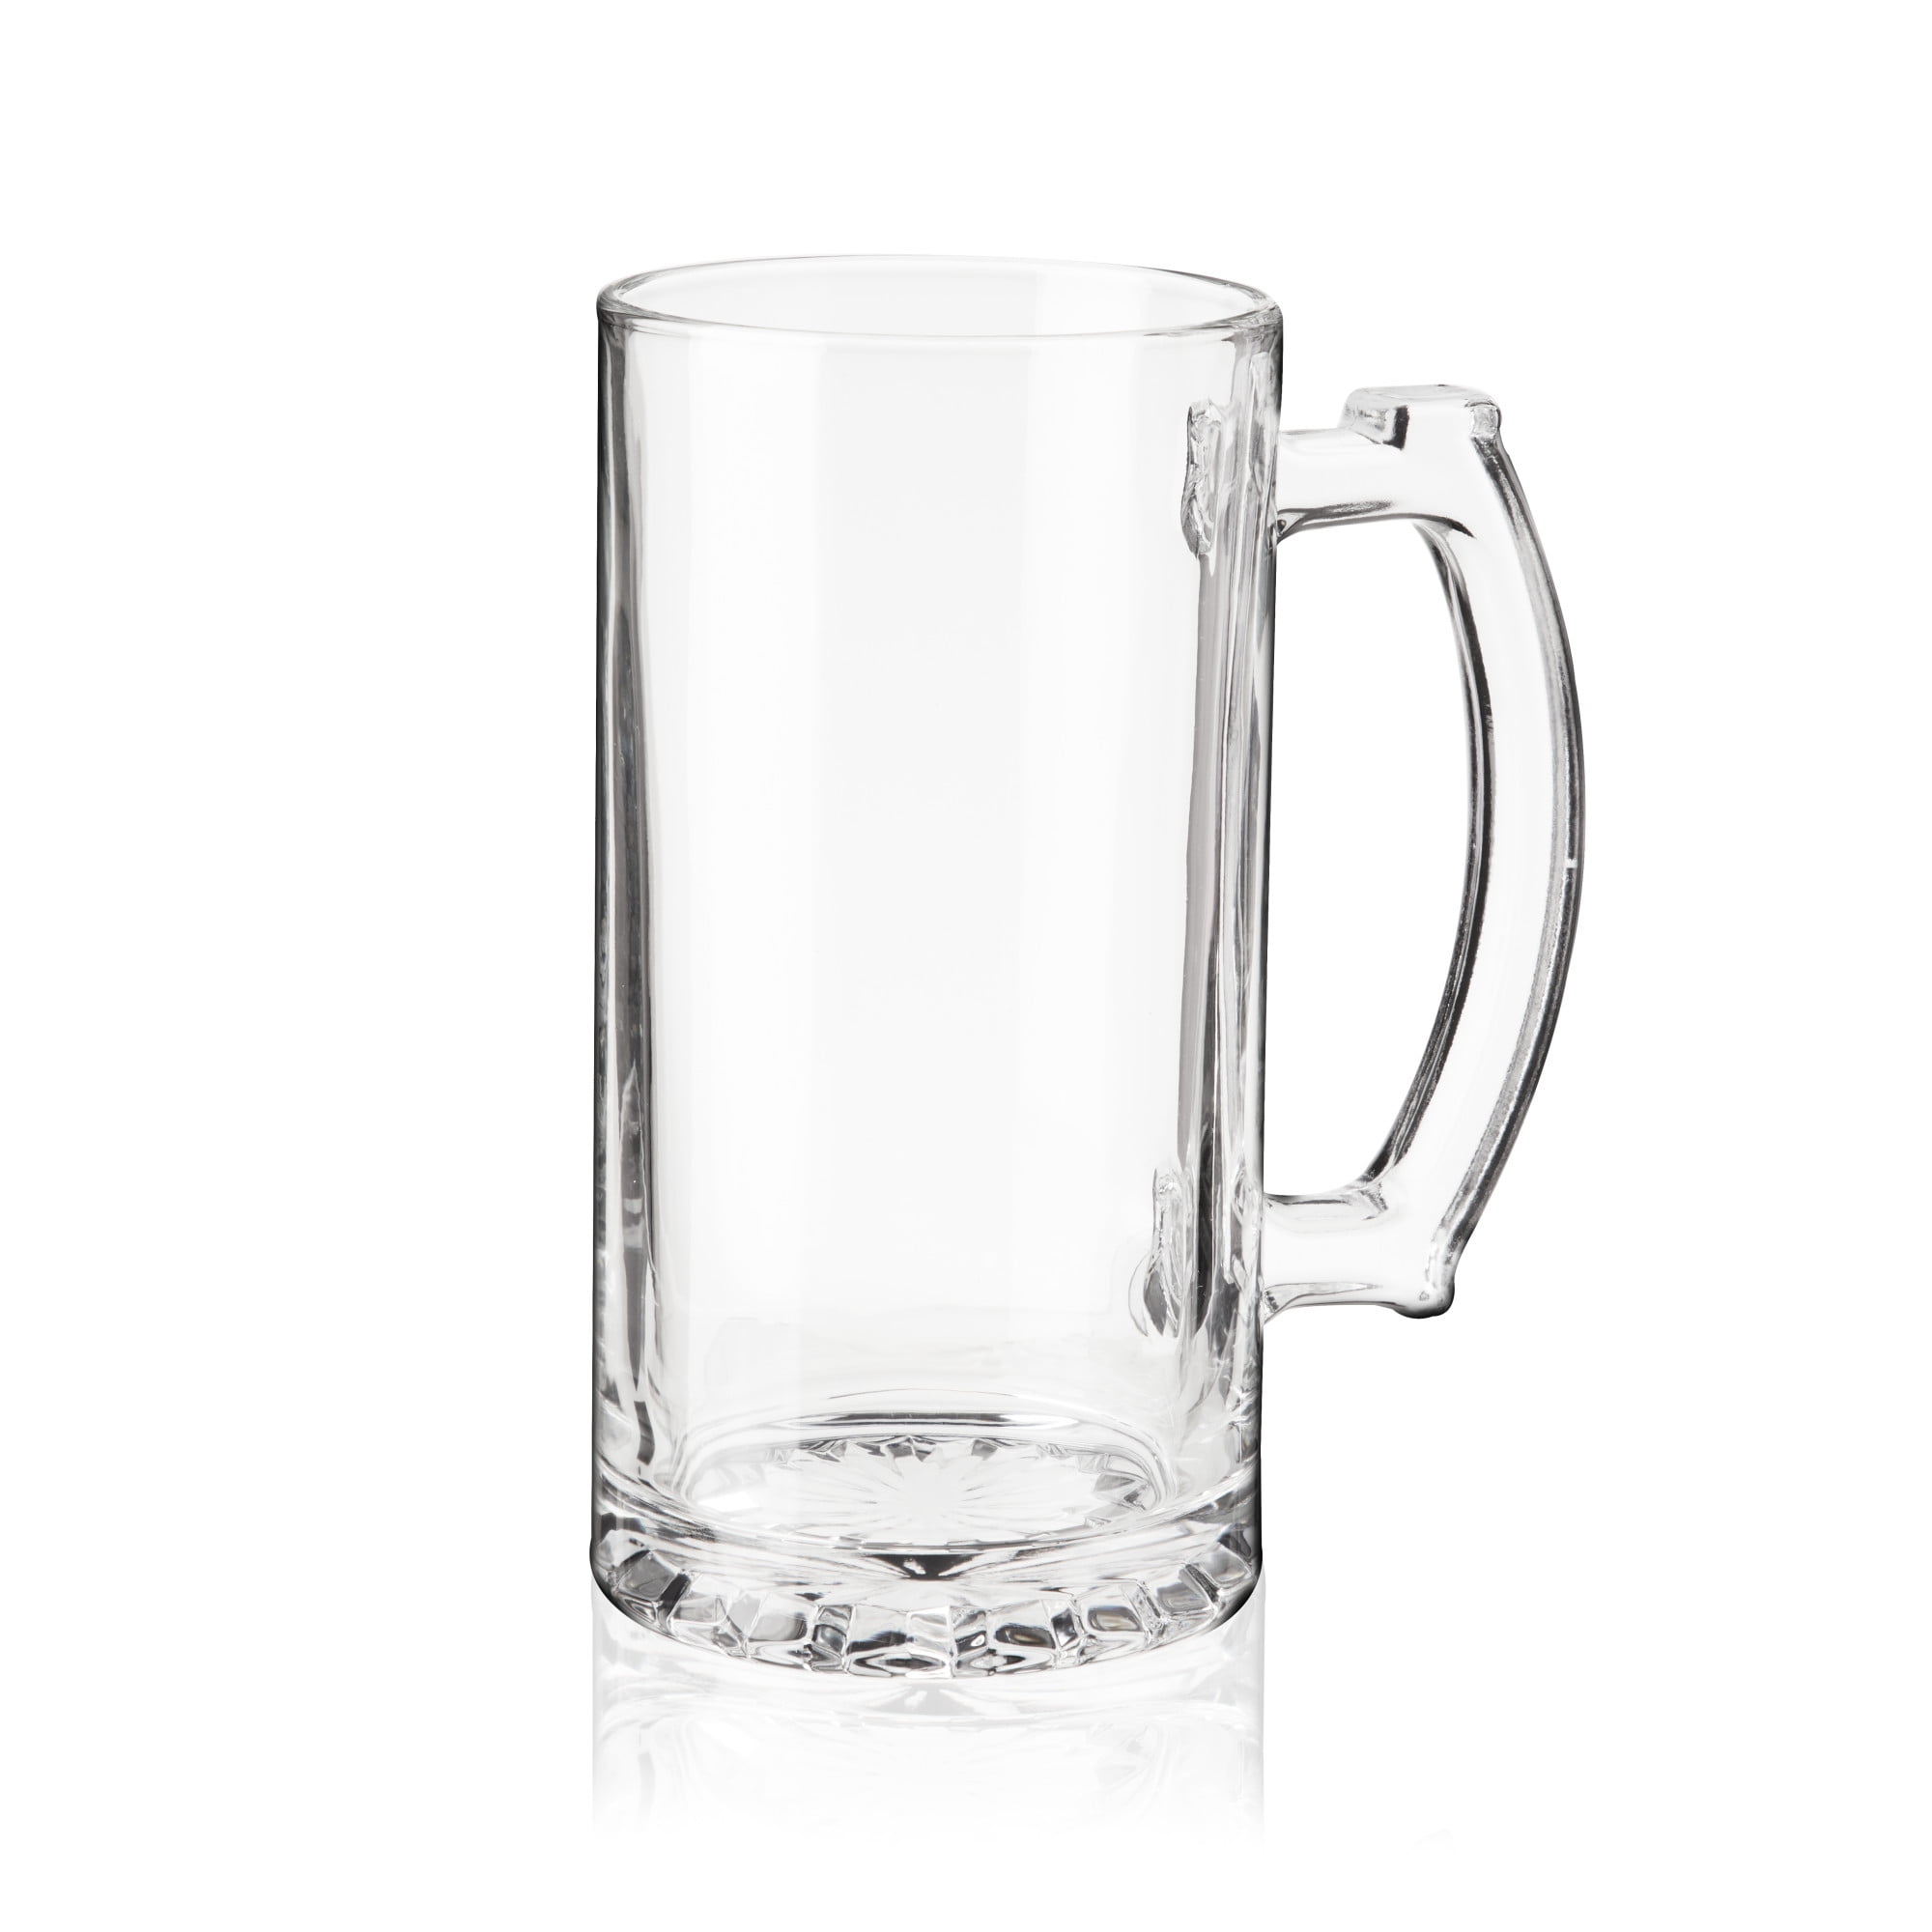 Momugs 32 Ounces Beer Stein Mugs - 2 Pack Extra Large German Style Clear Tall Beer Glasses for Men - Heavy Duty Thick Glass with Handle